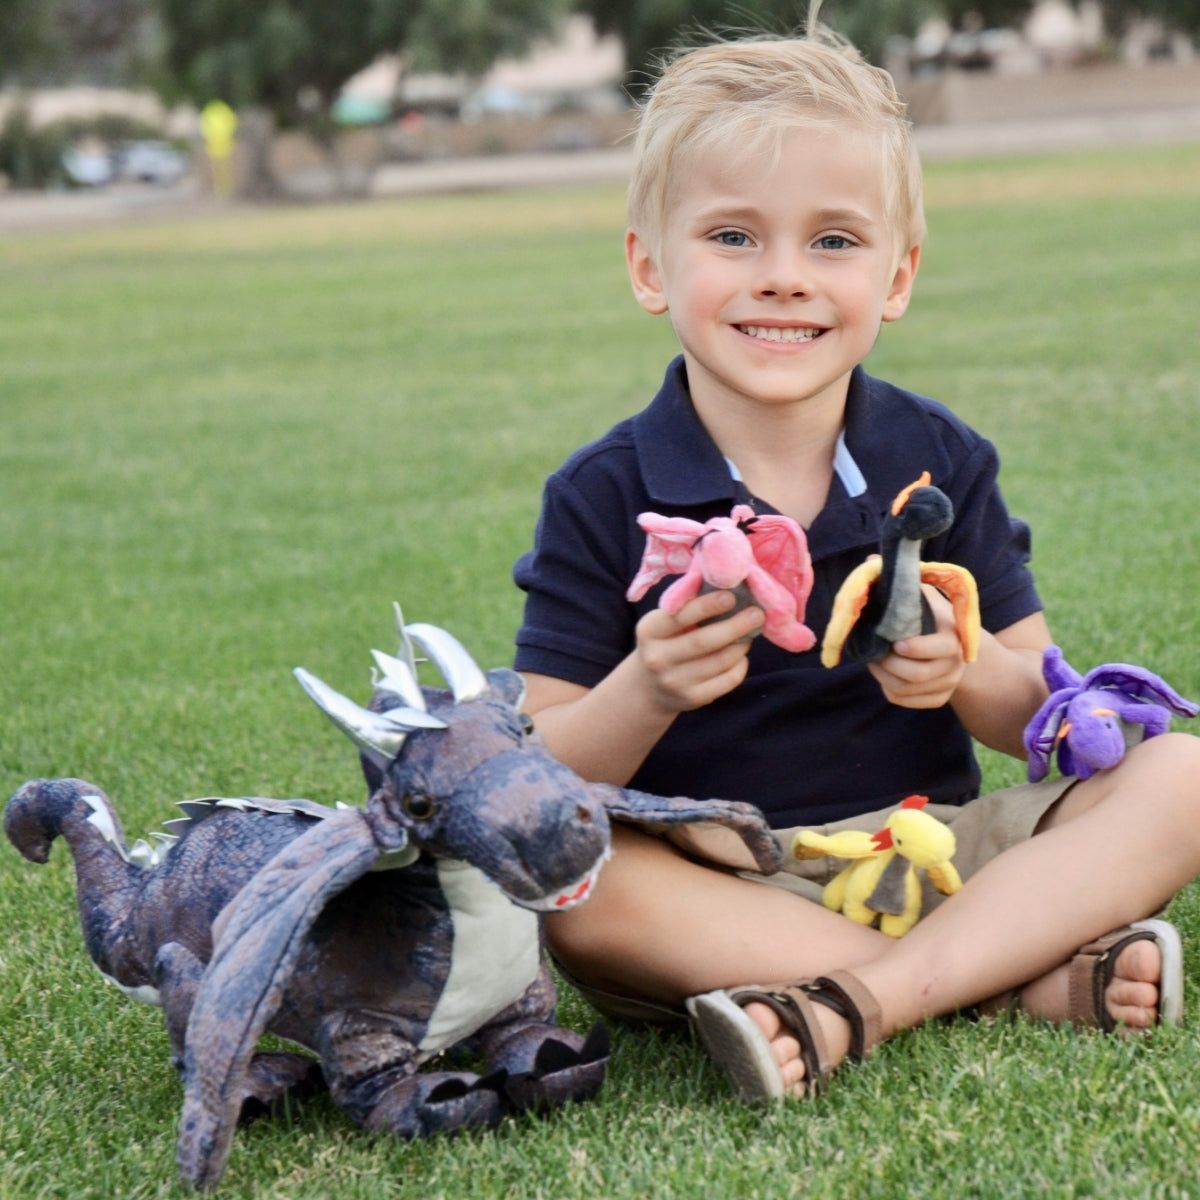 You'll absolutely love our marvelous Flying Dragon Plush Toy. It arrives with 4 cool mini dragon plushies and 2 adorable dragon eggs. This plushie set is made from the softest faux fur and plush PP cotton filling, not just making it look impressive but also making it cuddly. A fantastic present for anyone who loves stuffed toys!